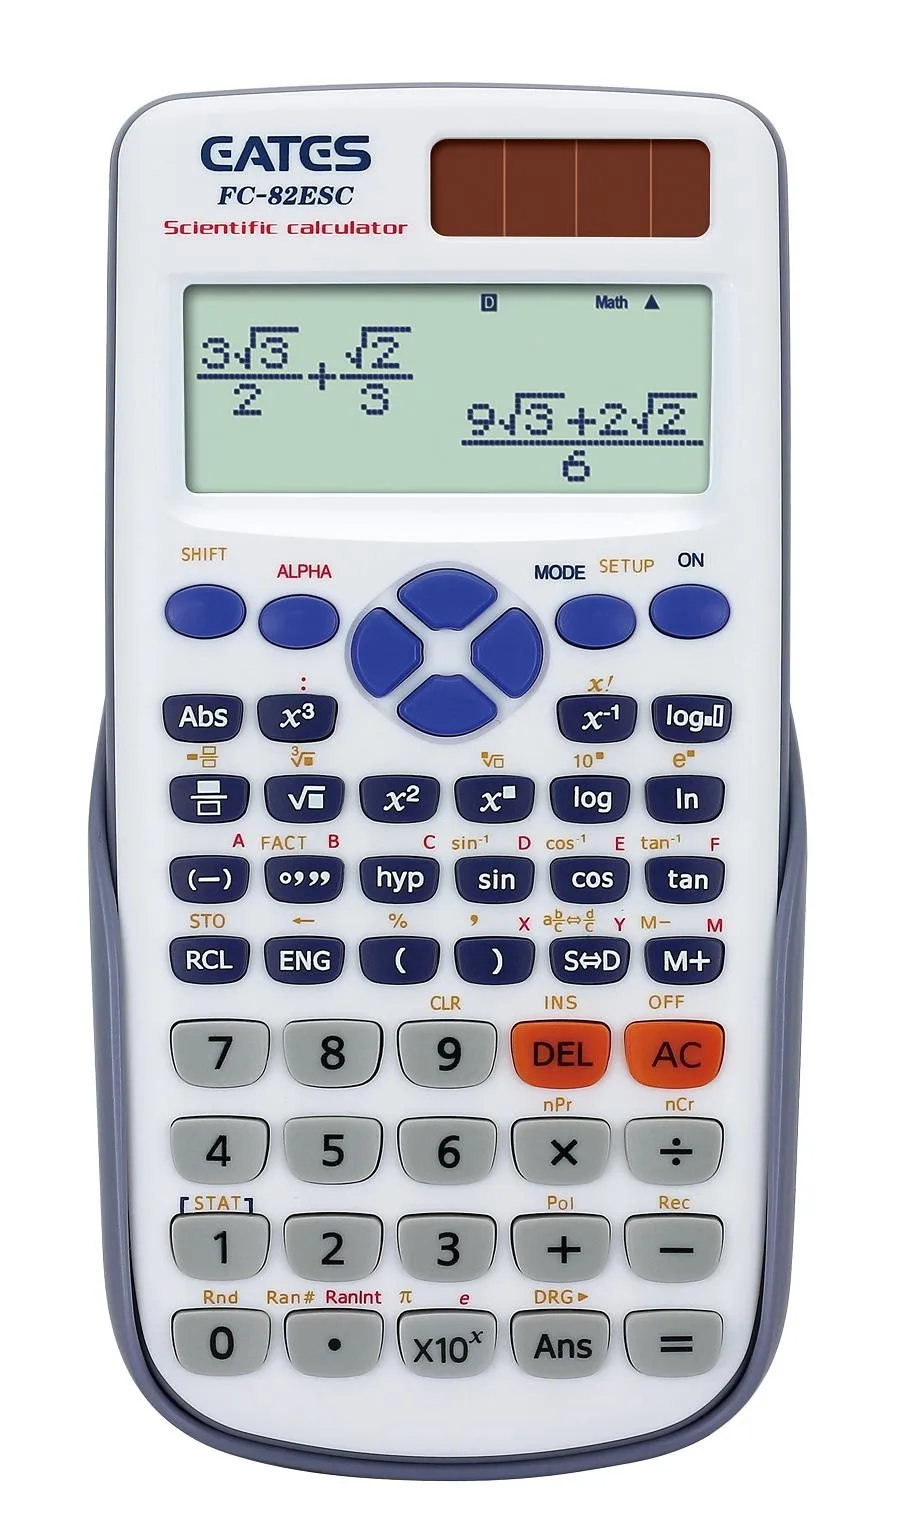 Details about   Digital Scientific Calculator Mathematics 2 Line Display For Student School Use